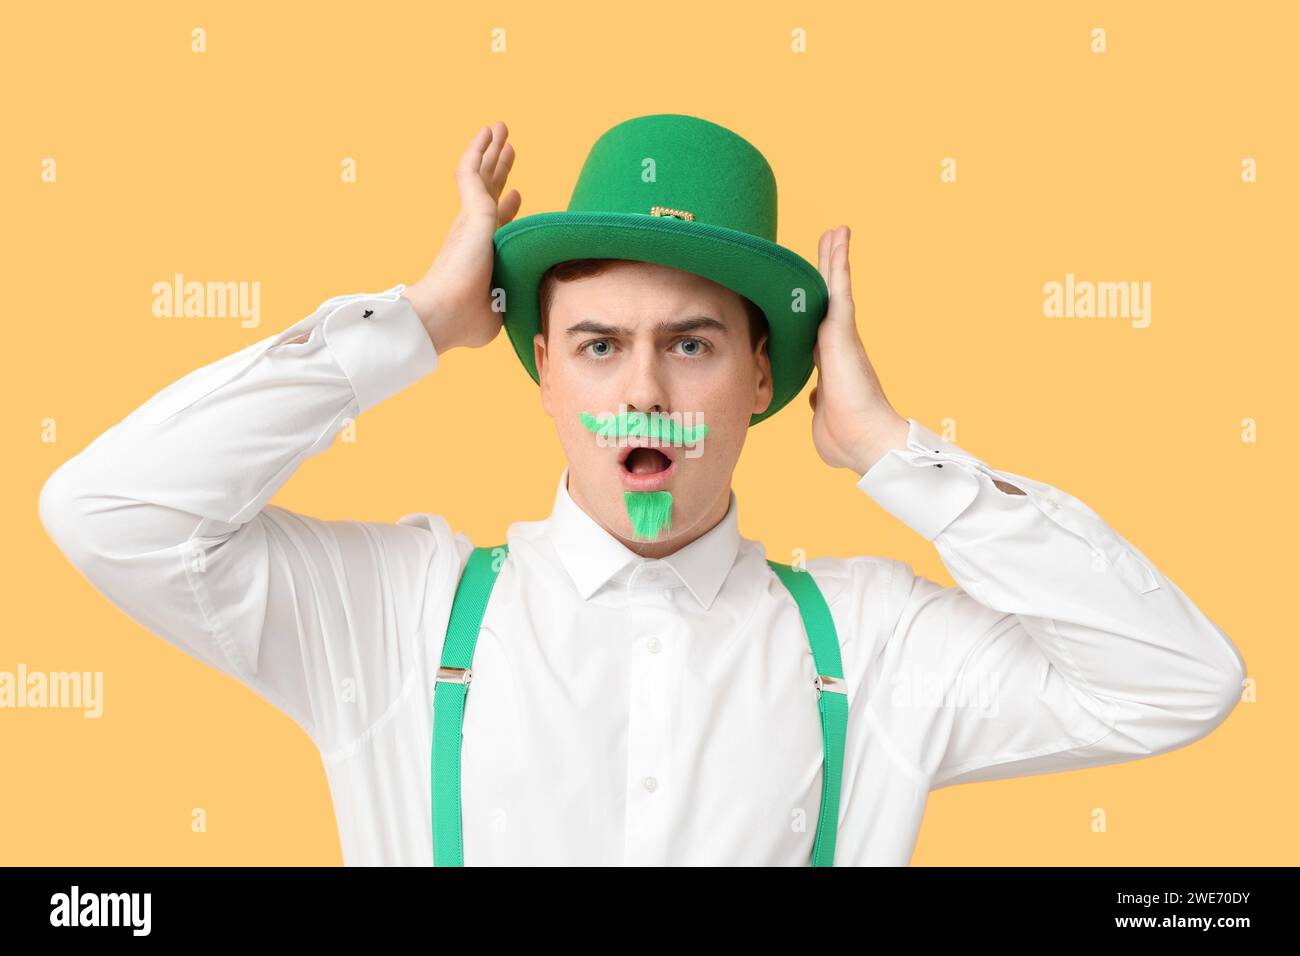 Shocked young man in leprechaun's hat on yellow background. St. Patrick's Day celebration Stock Photo